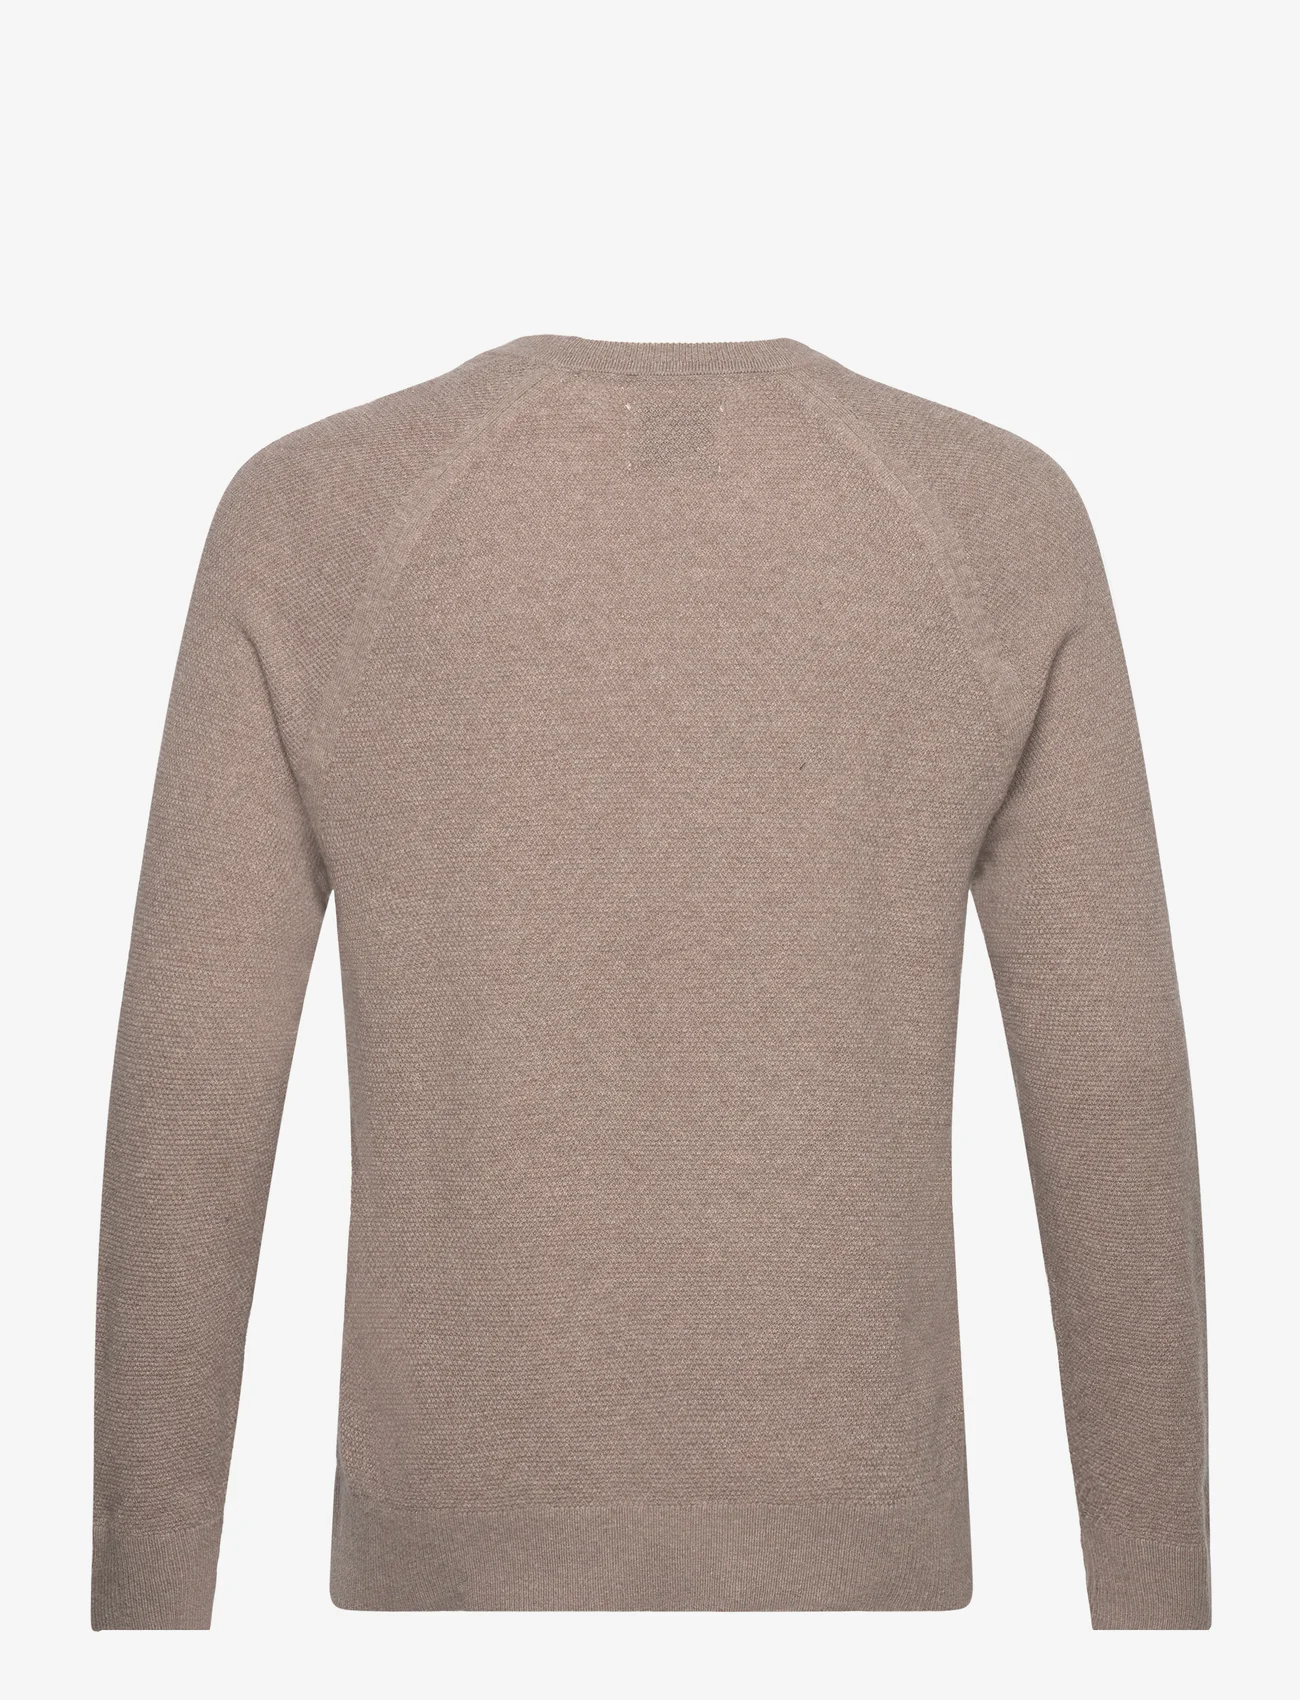 Abercrombie & Fitch - ANF MENS SWEATERS - rundhals - b2665 - 1